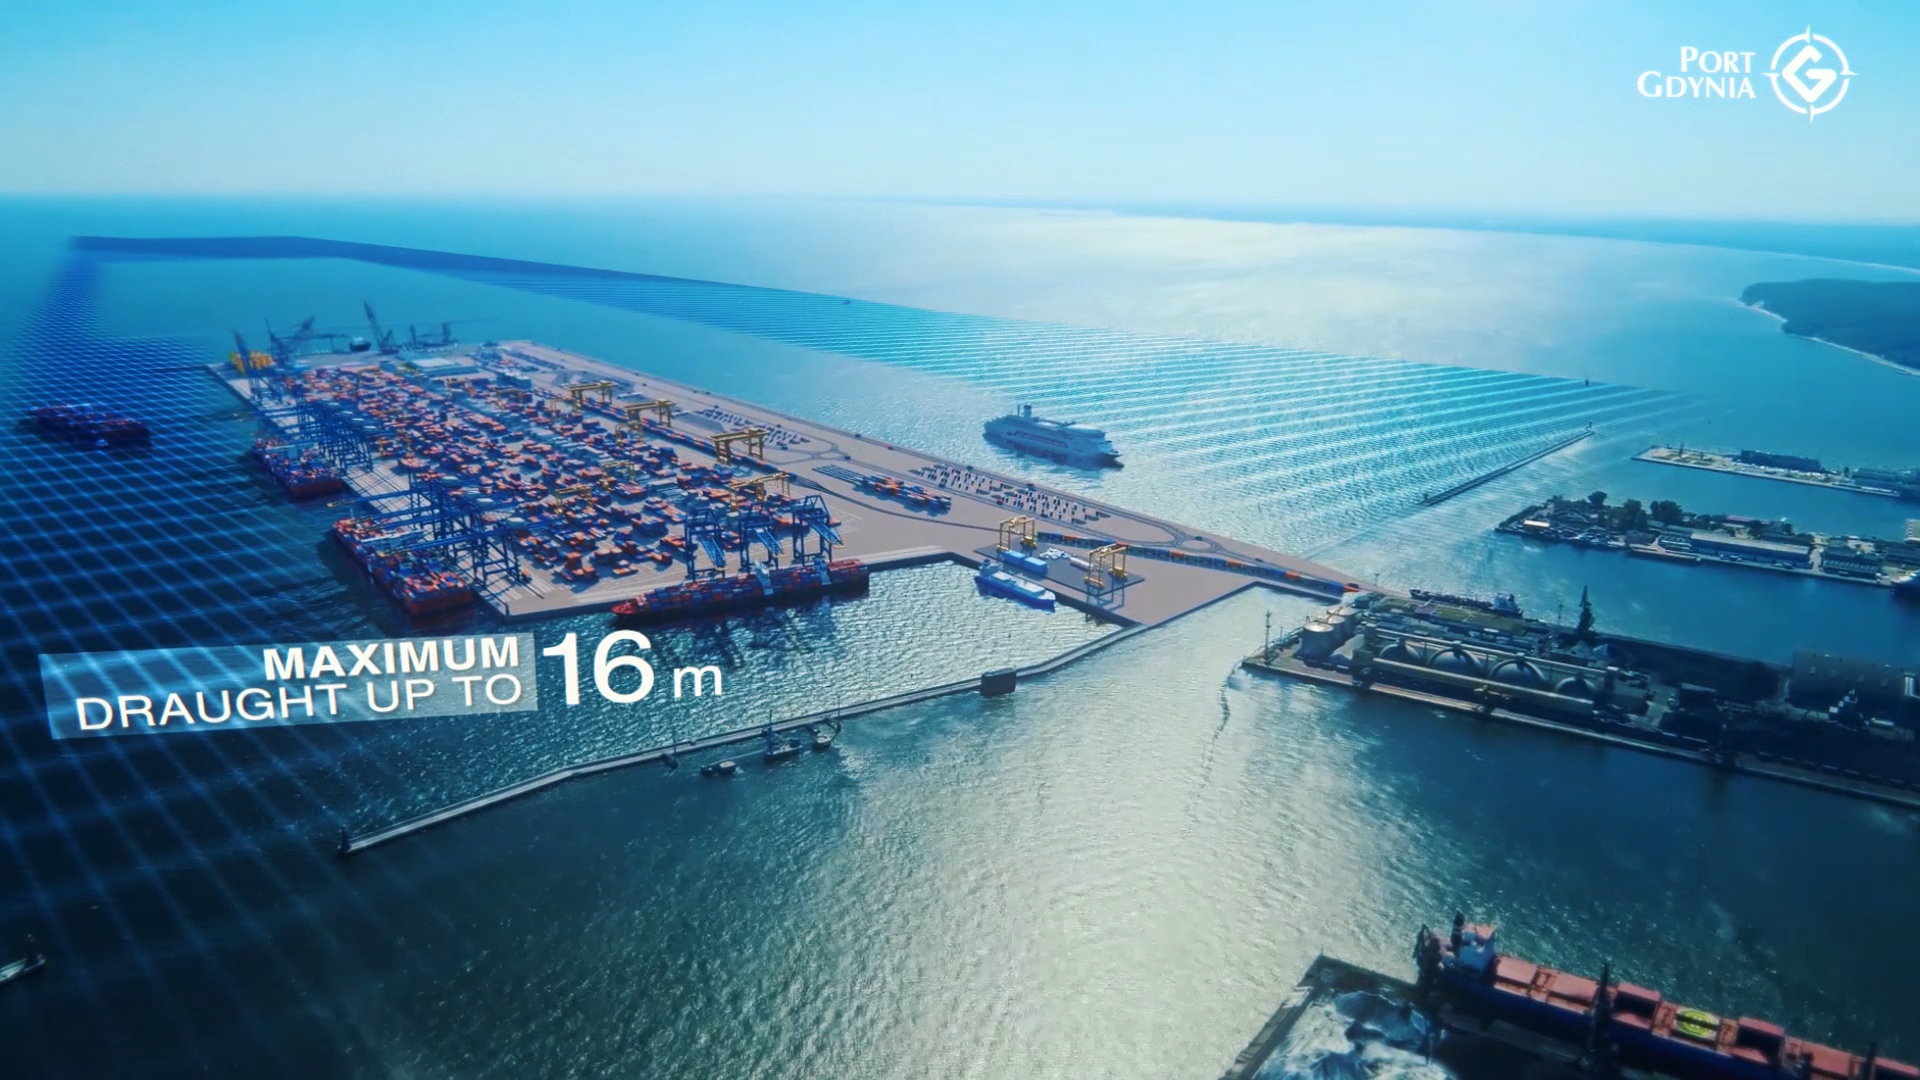 PLN 167 million of EU support for investments in seaports - MarinePoland.com